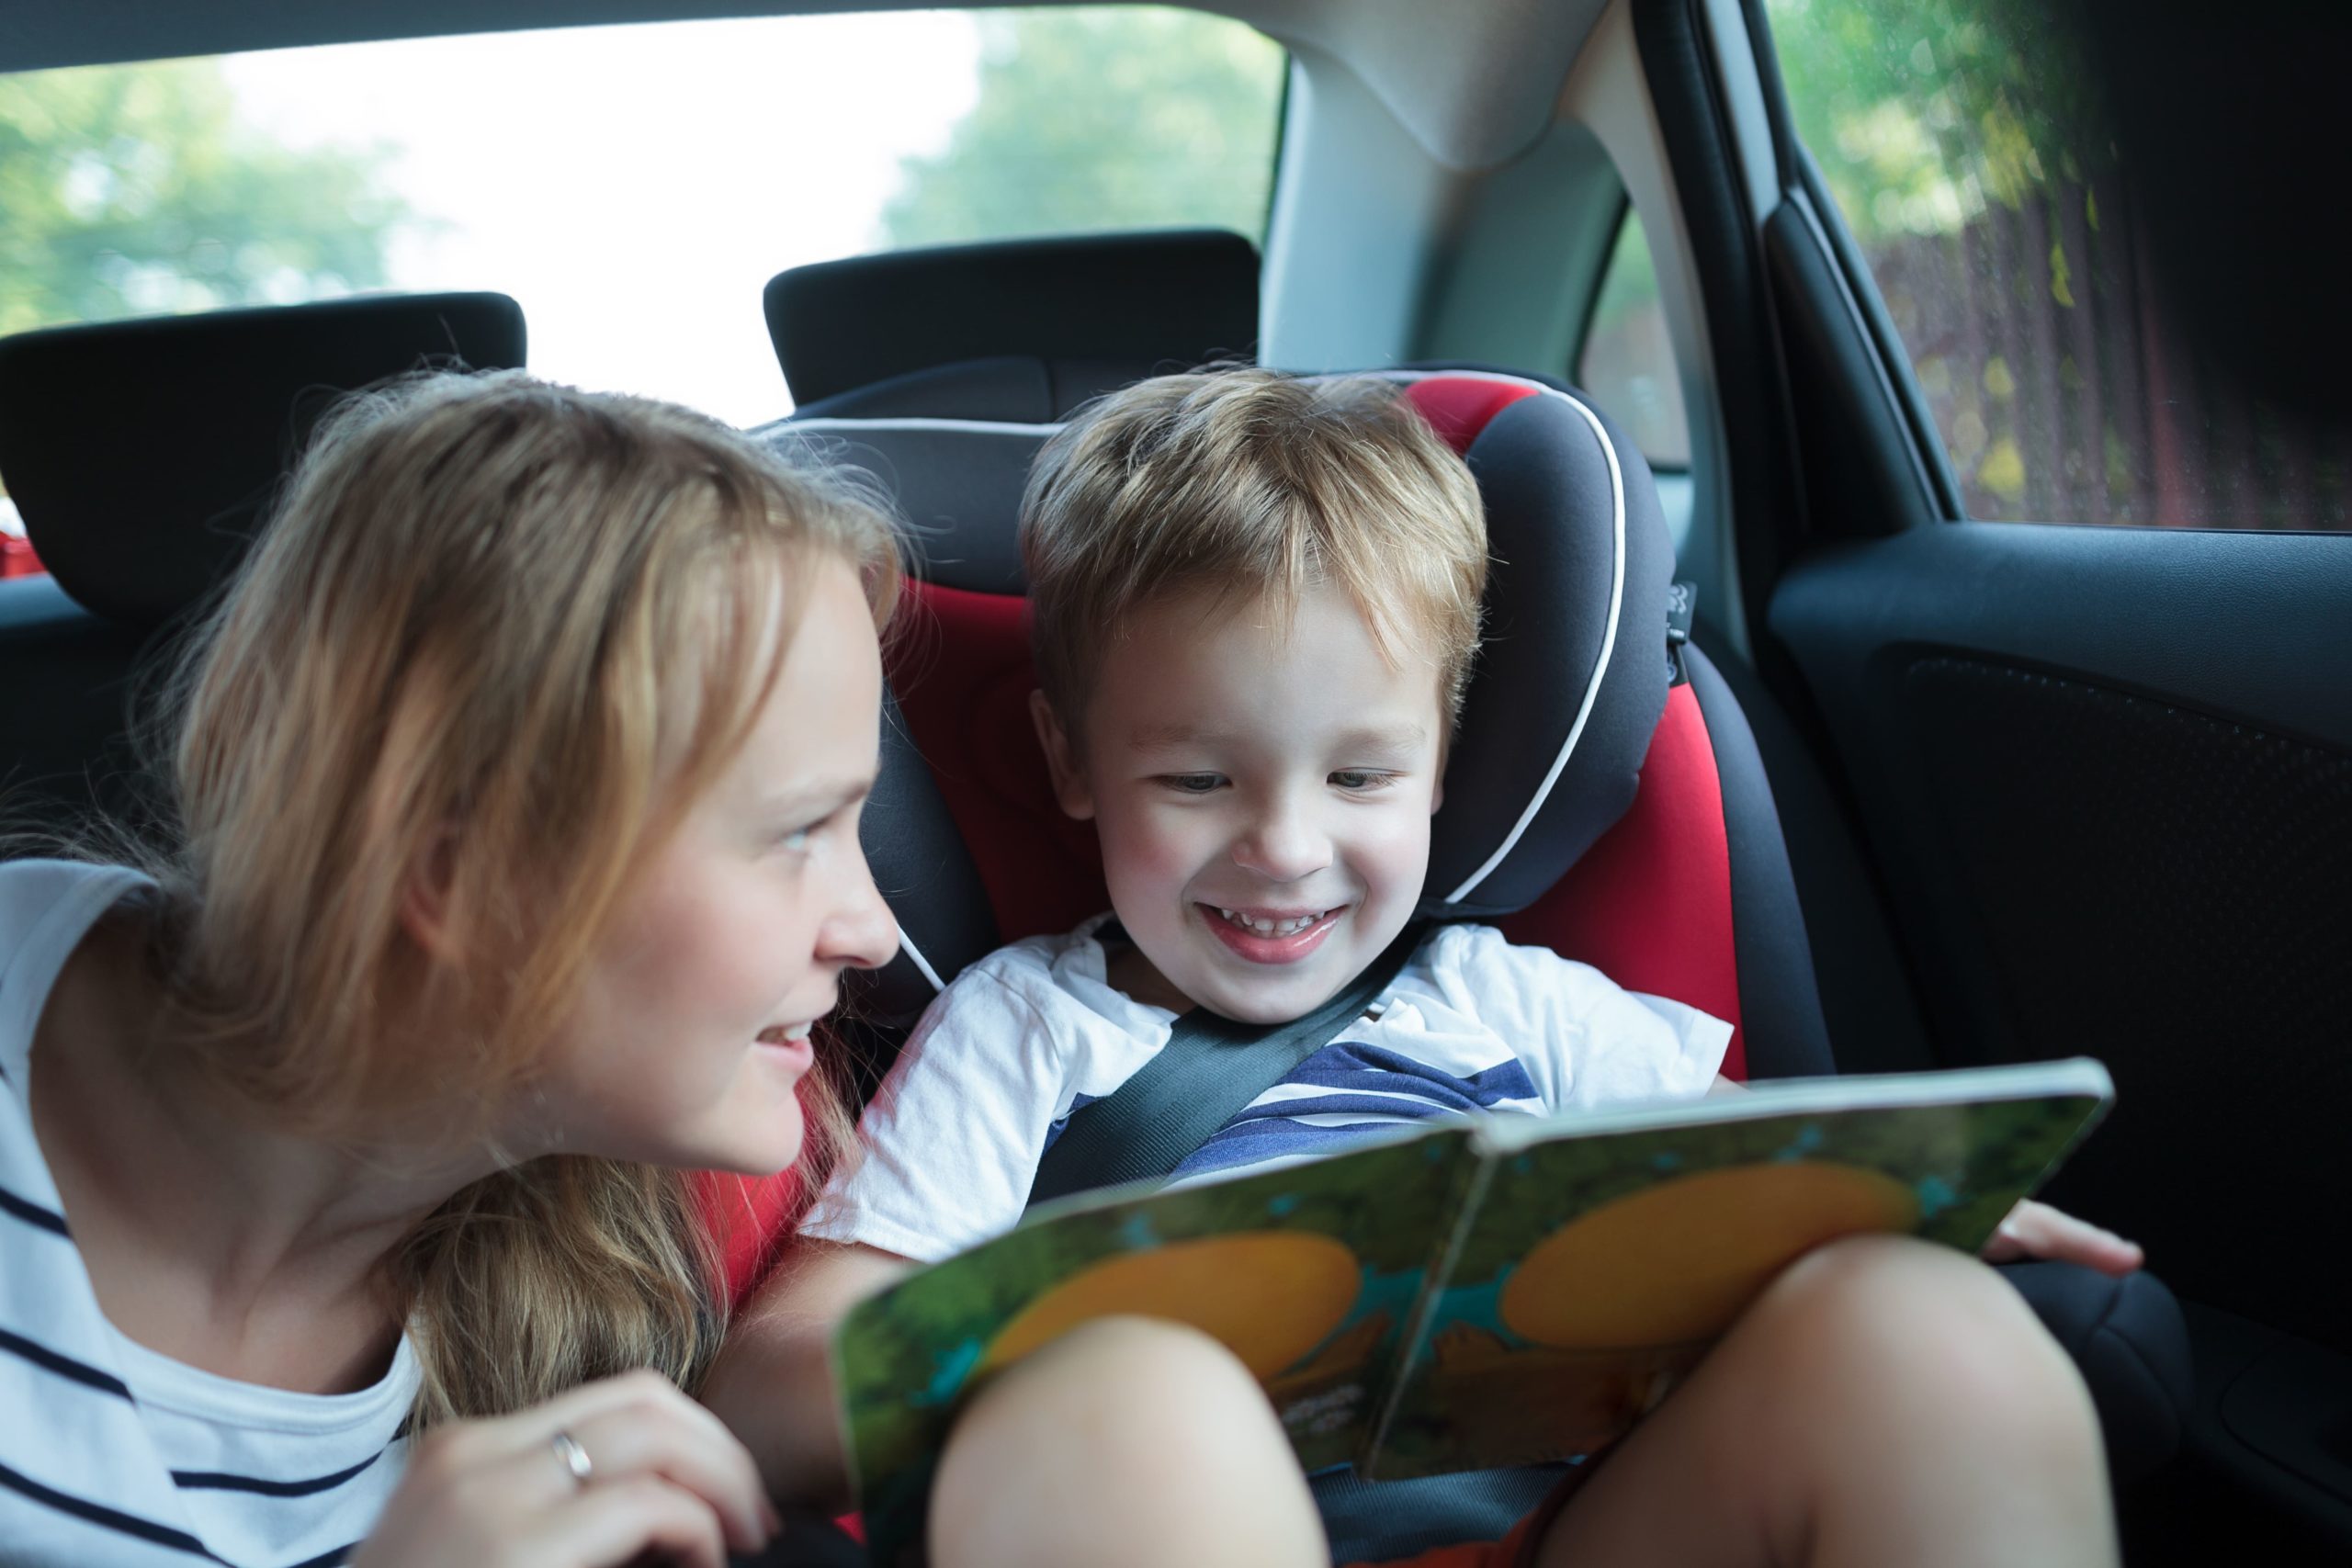 Does Insurance Cover Car Seat Replacement After Accident?